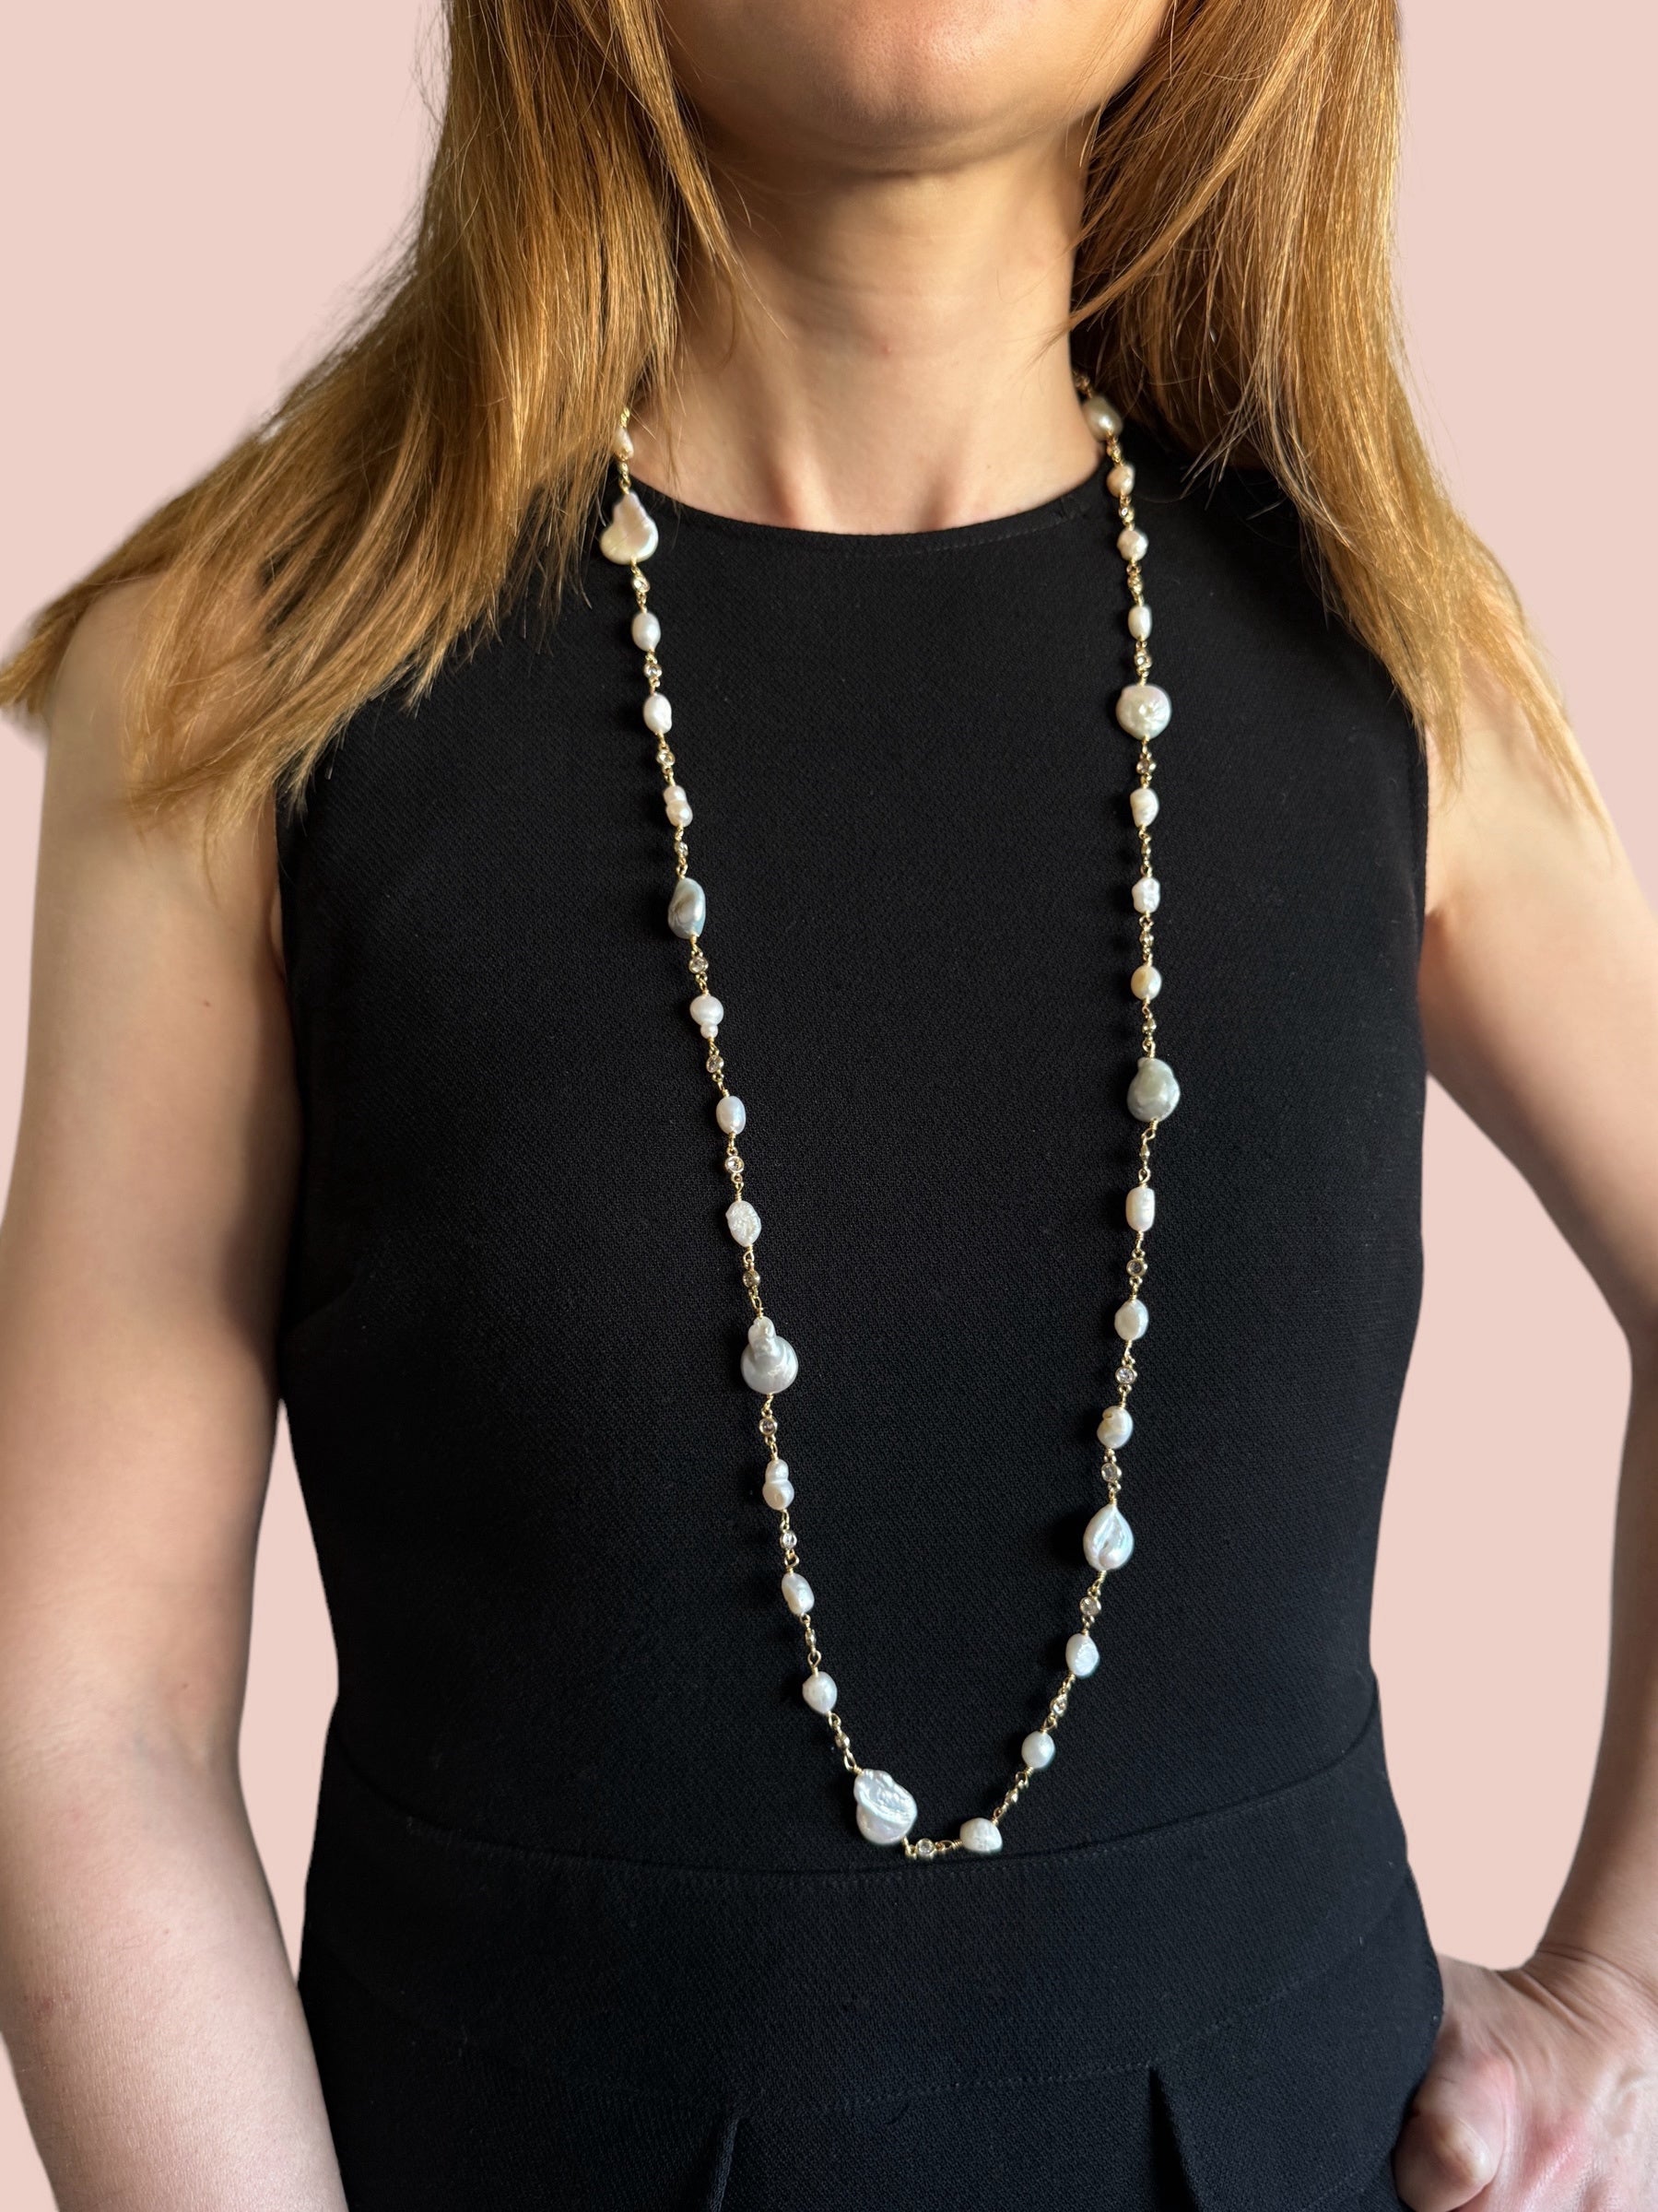 “Freshwater pearl long necklace”